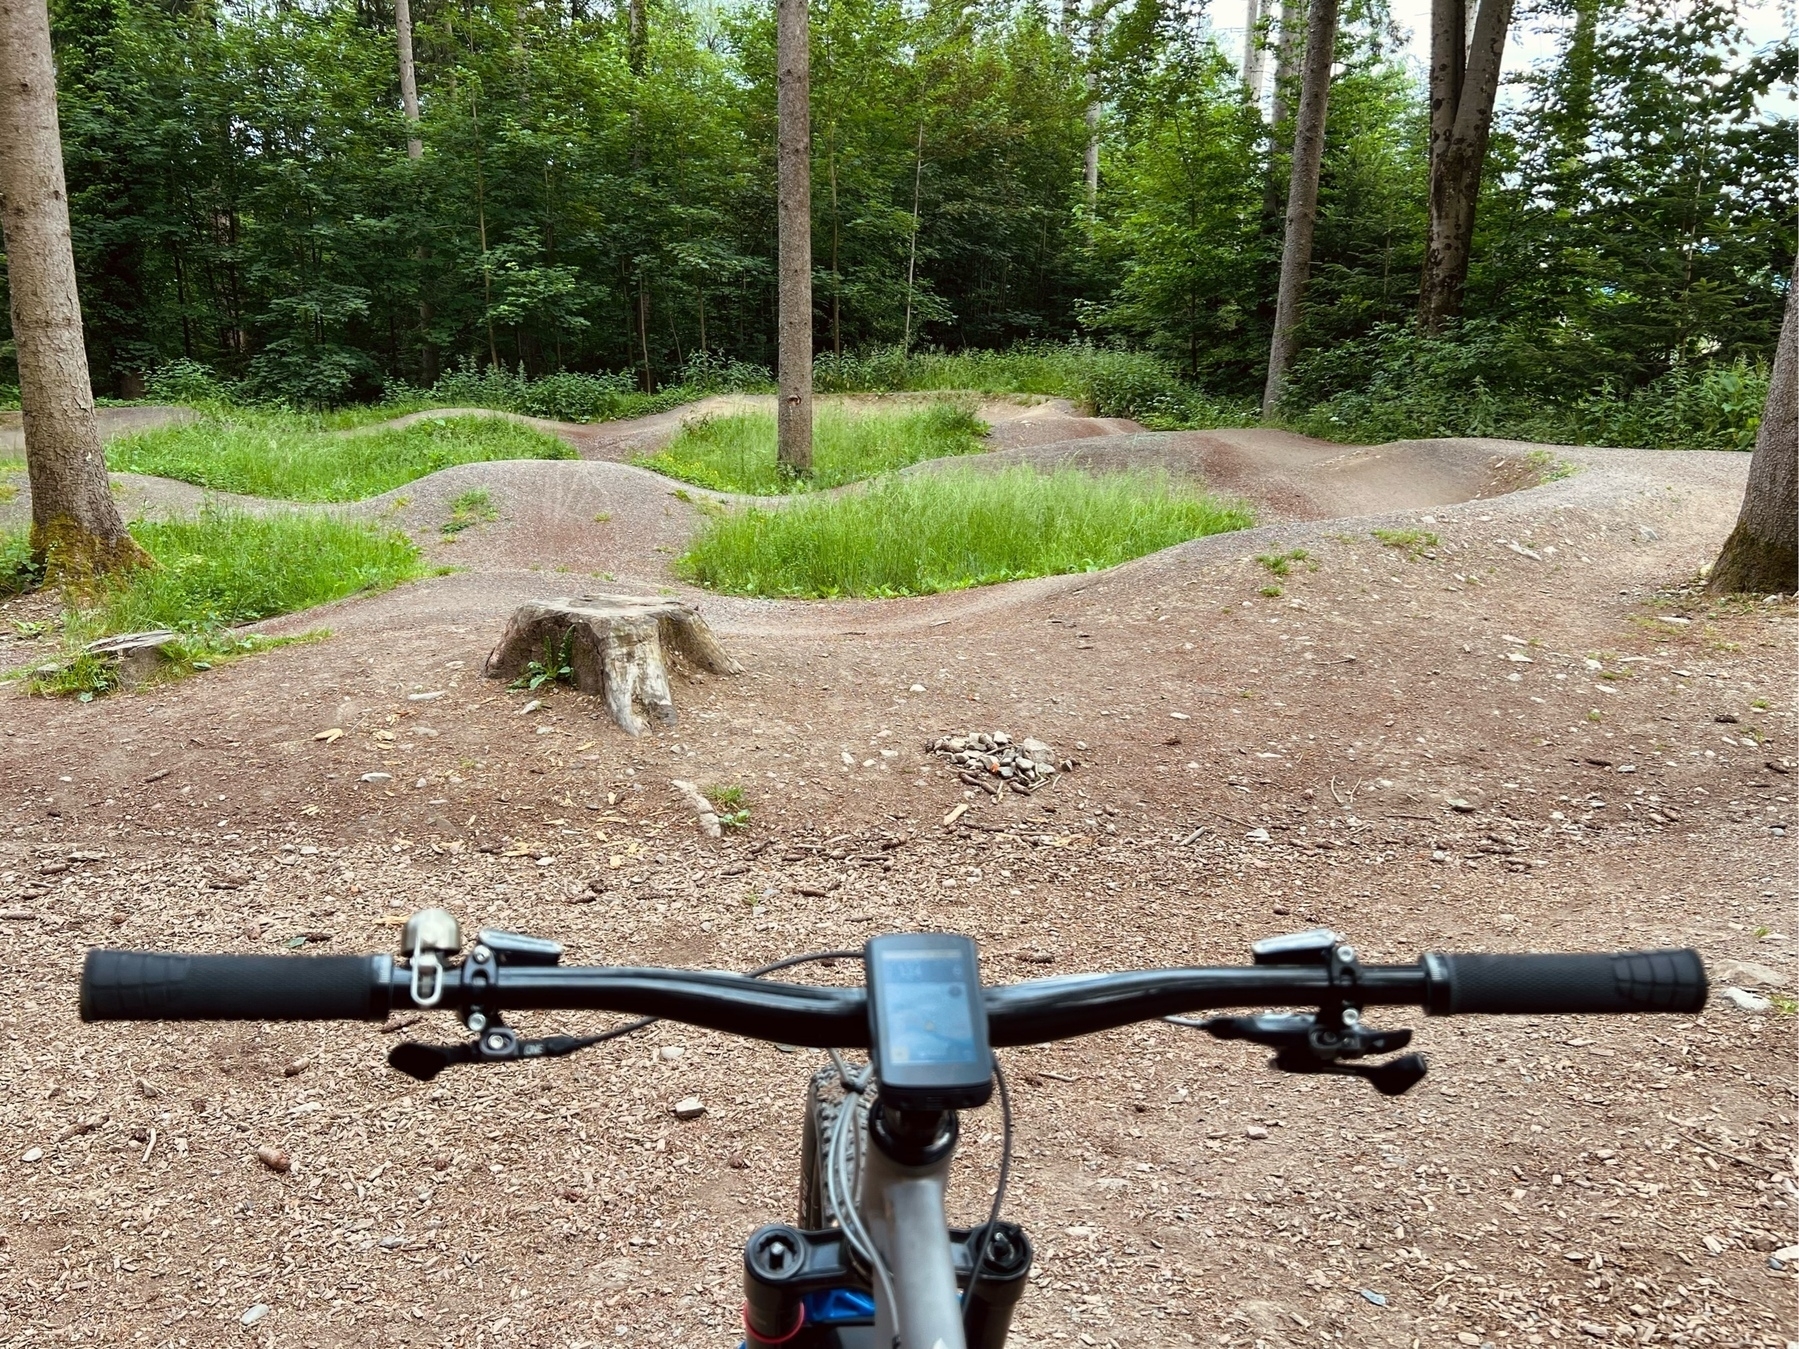 Cockpit of a hardtail mountain bike, slightly out of focus and in front of a bicycle pump track in a forest, surrounded by tall trees.